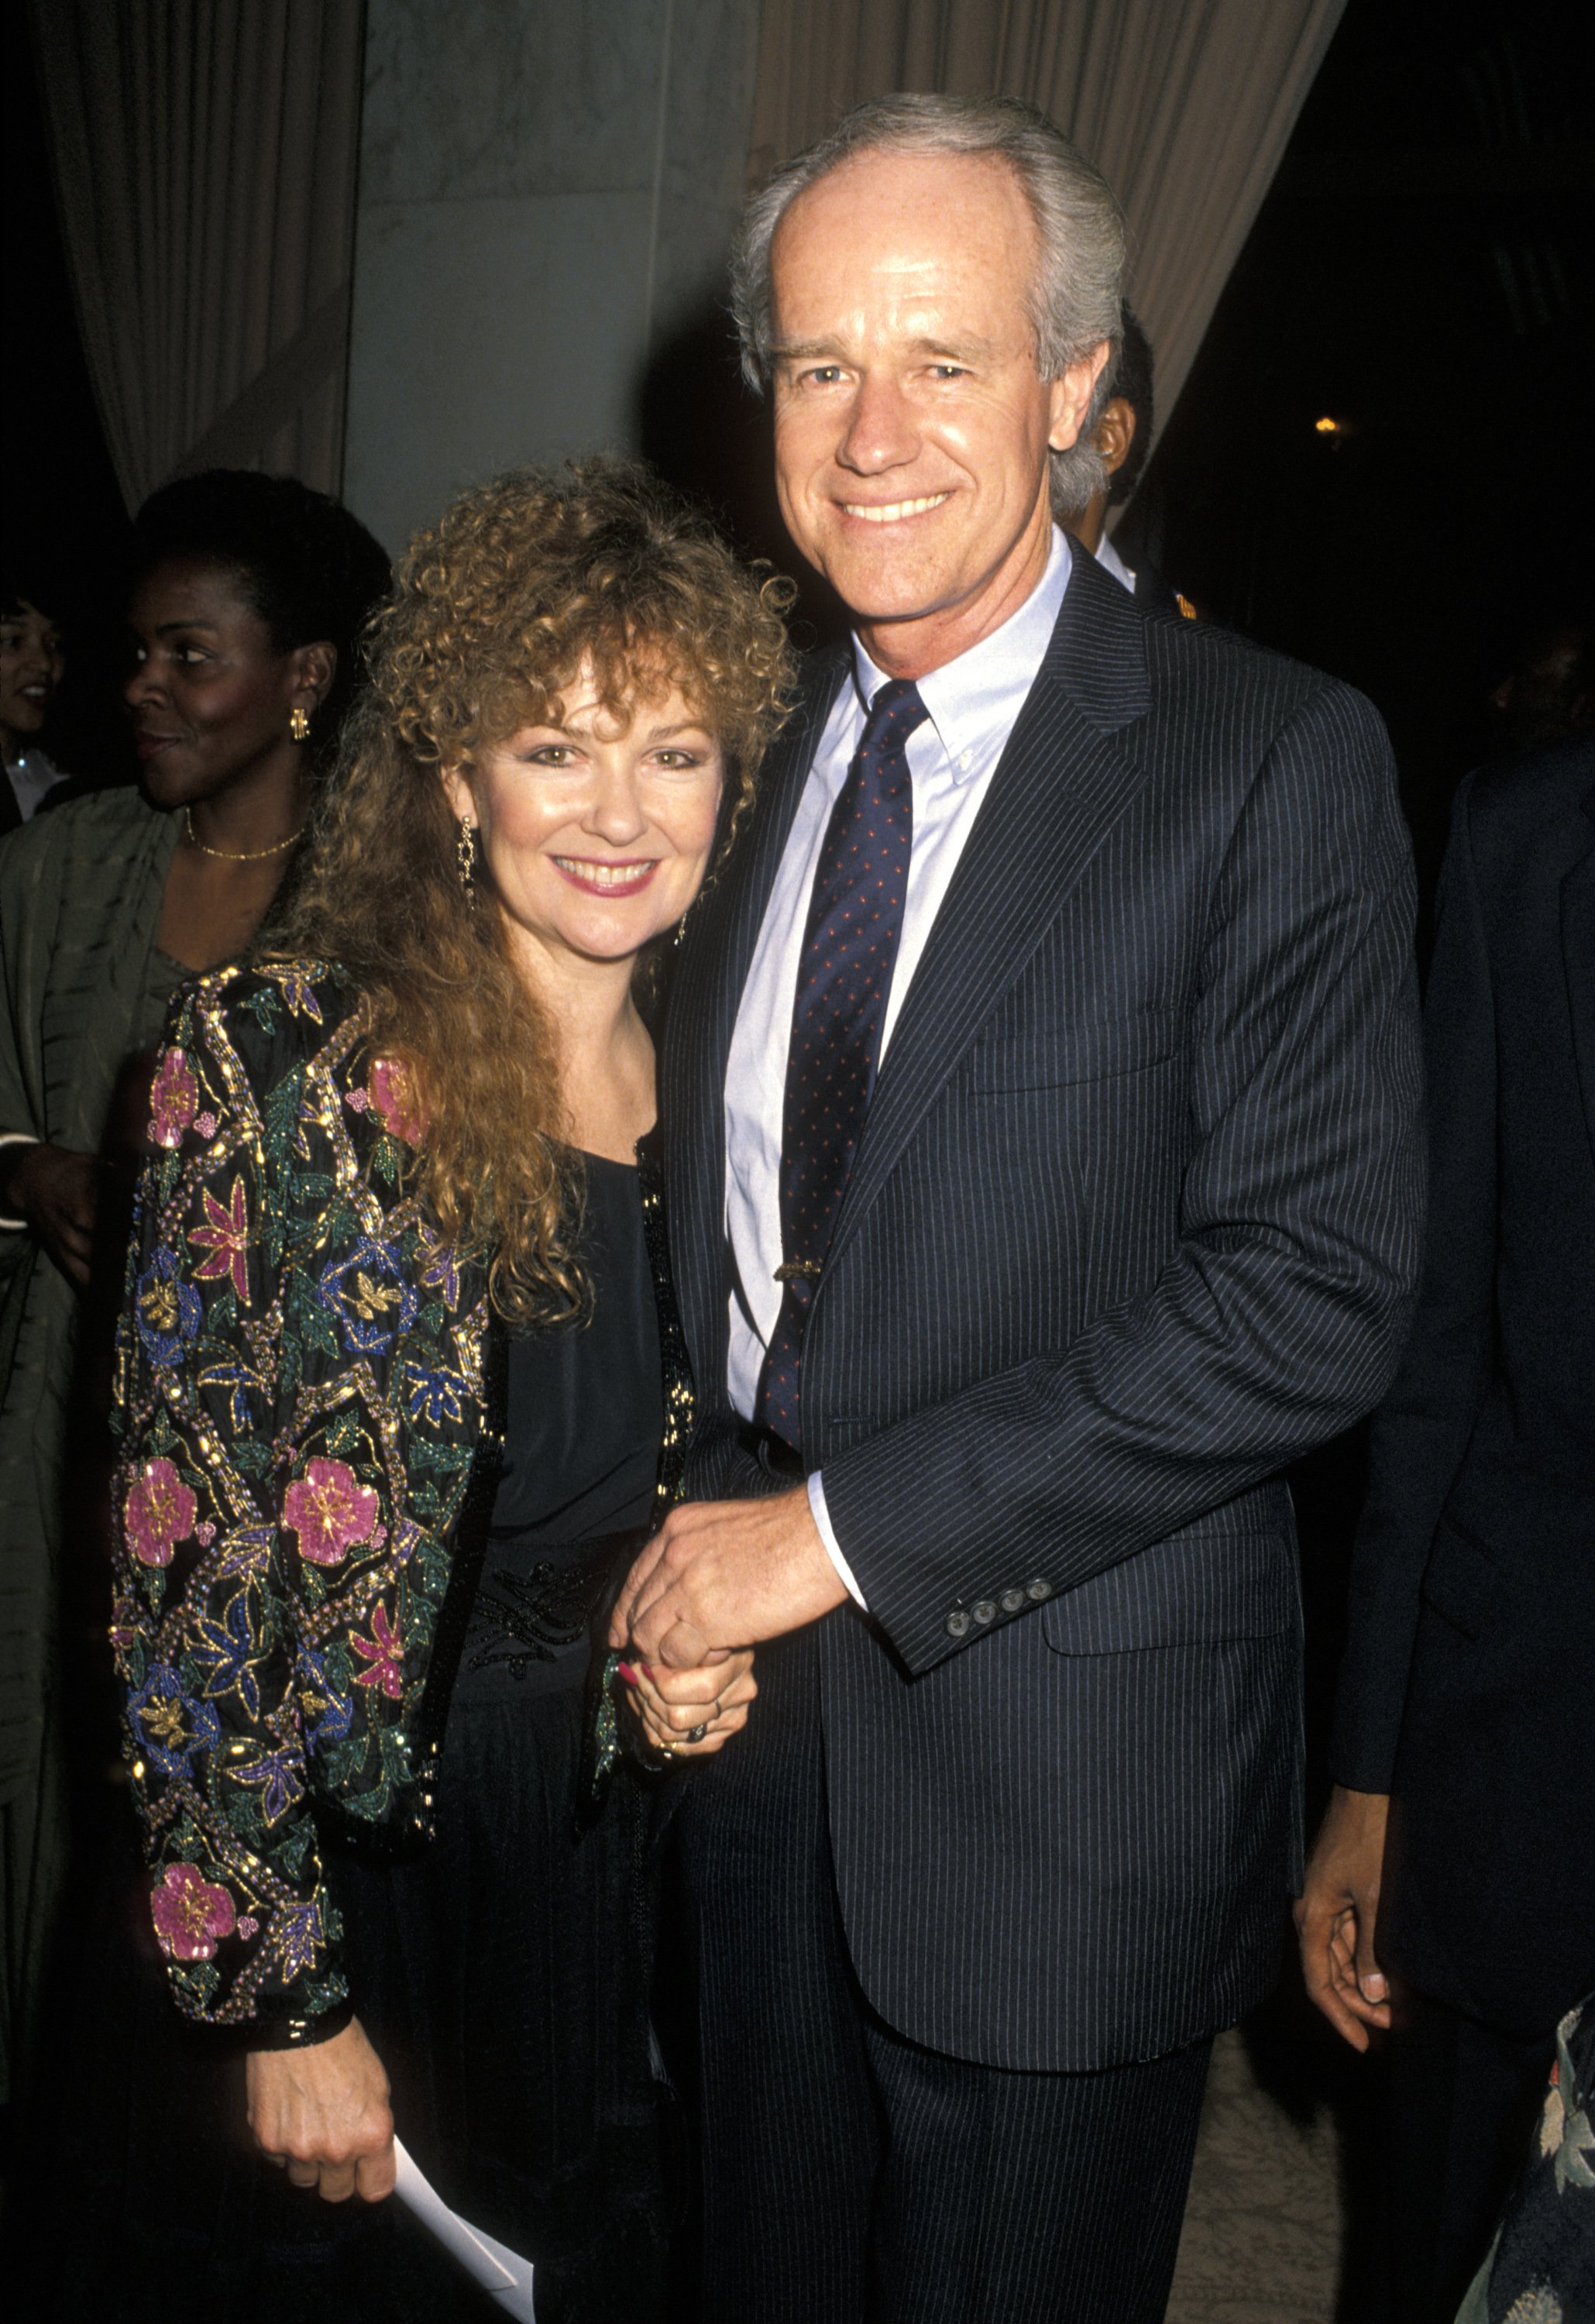 Shelley Fabares and Mike Farrell attend the First Annual Nelson Mandela "Bridge to Freedom" Awards at the Beverly Wilshire Hotel on April 1, 1990 in Beverly Hills, California. | Source: Getty Images